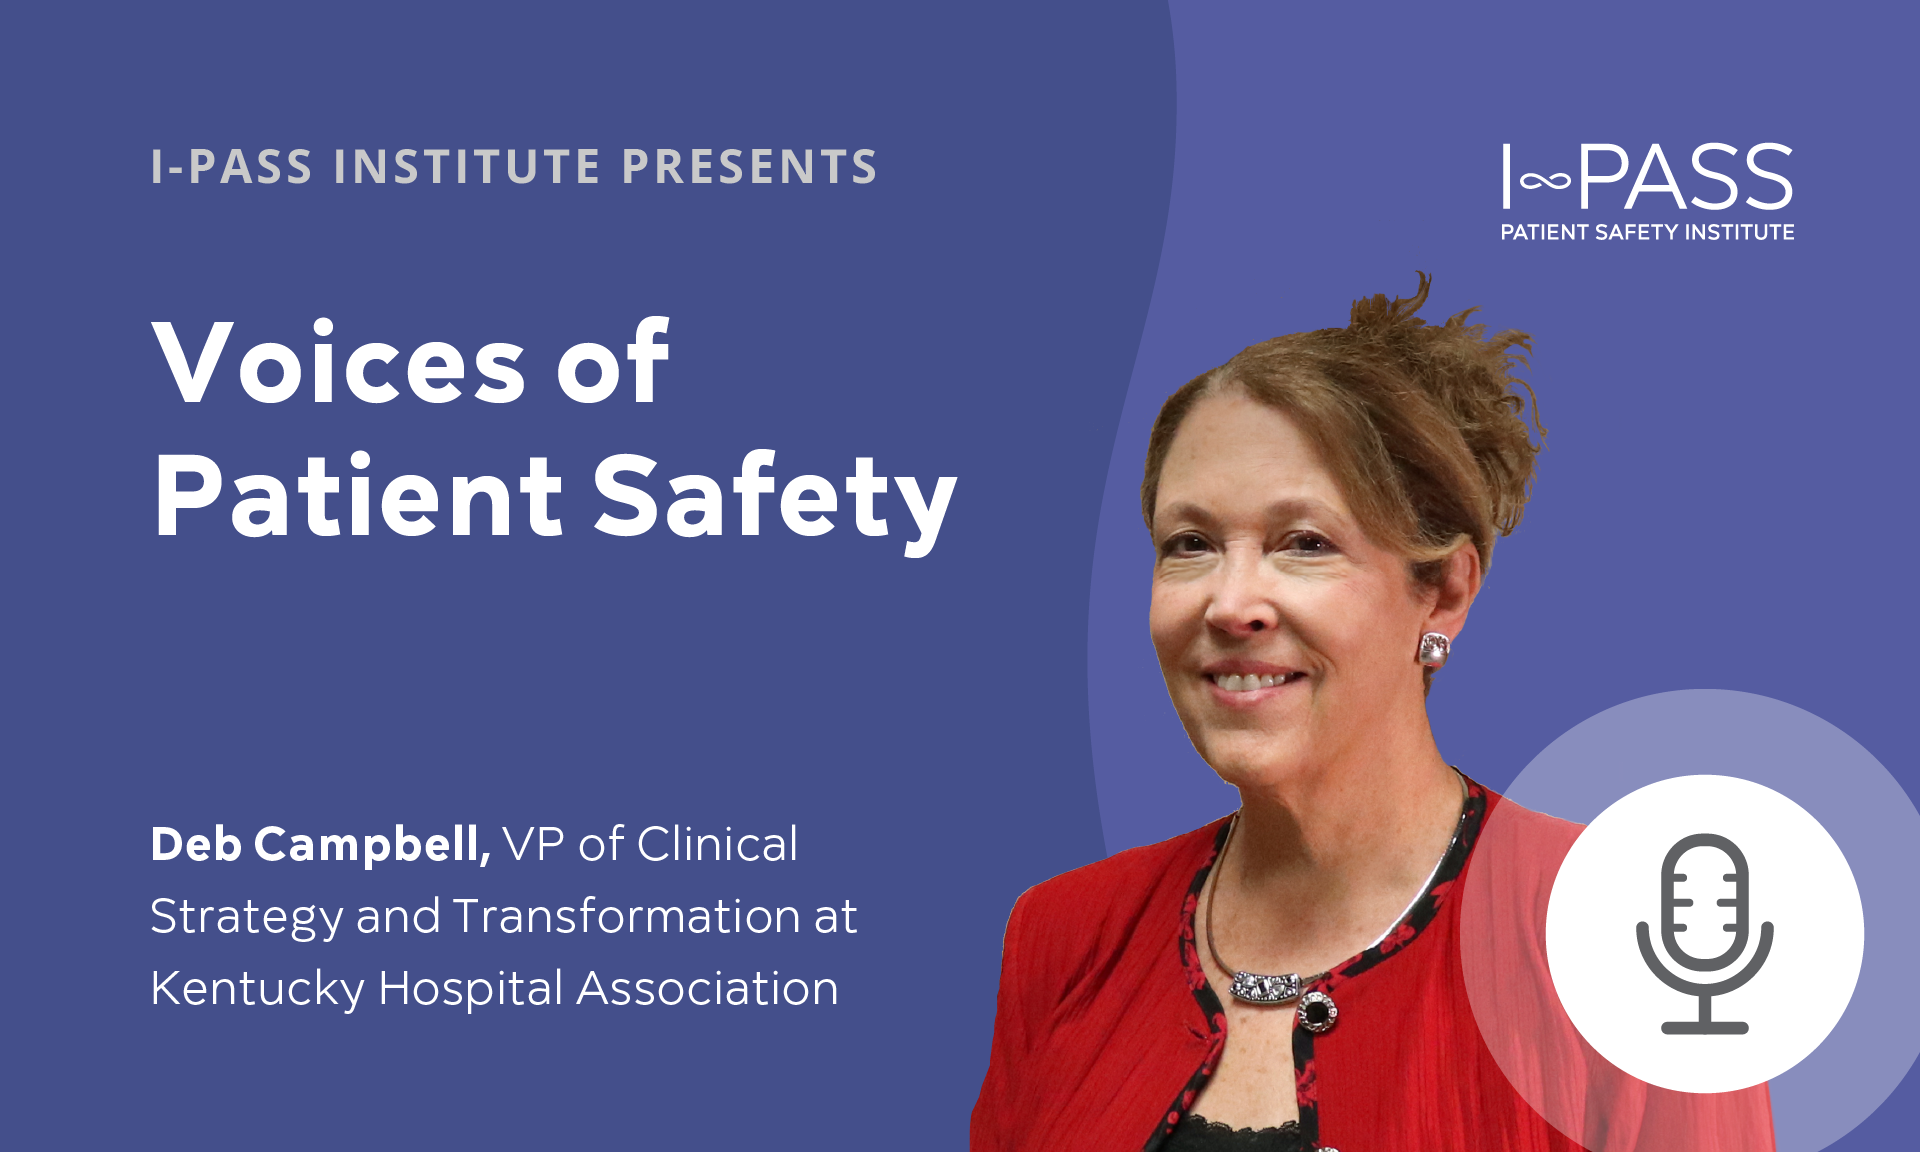 Voices of Patient Safety: Deb Campbell, VP of Clinical Strategy and Transformation at Kentucky Hospital Association